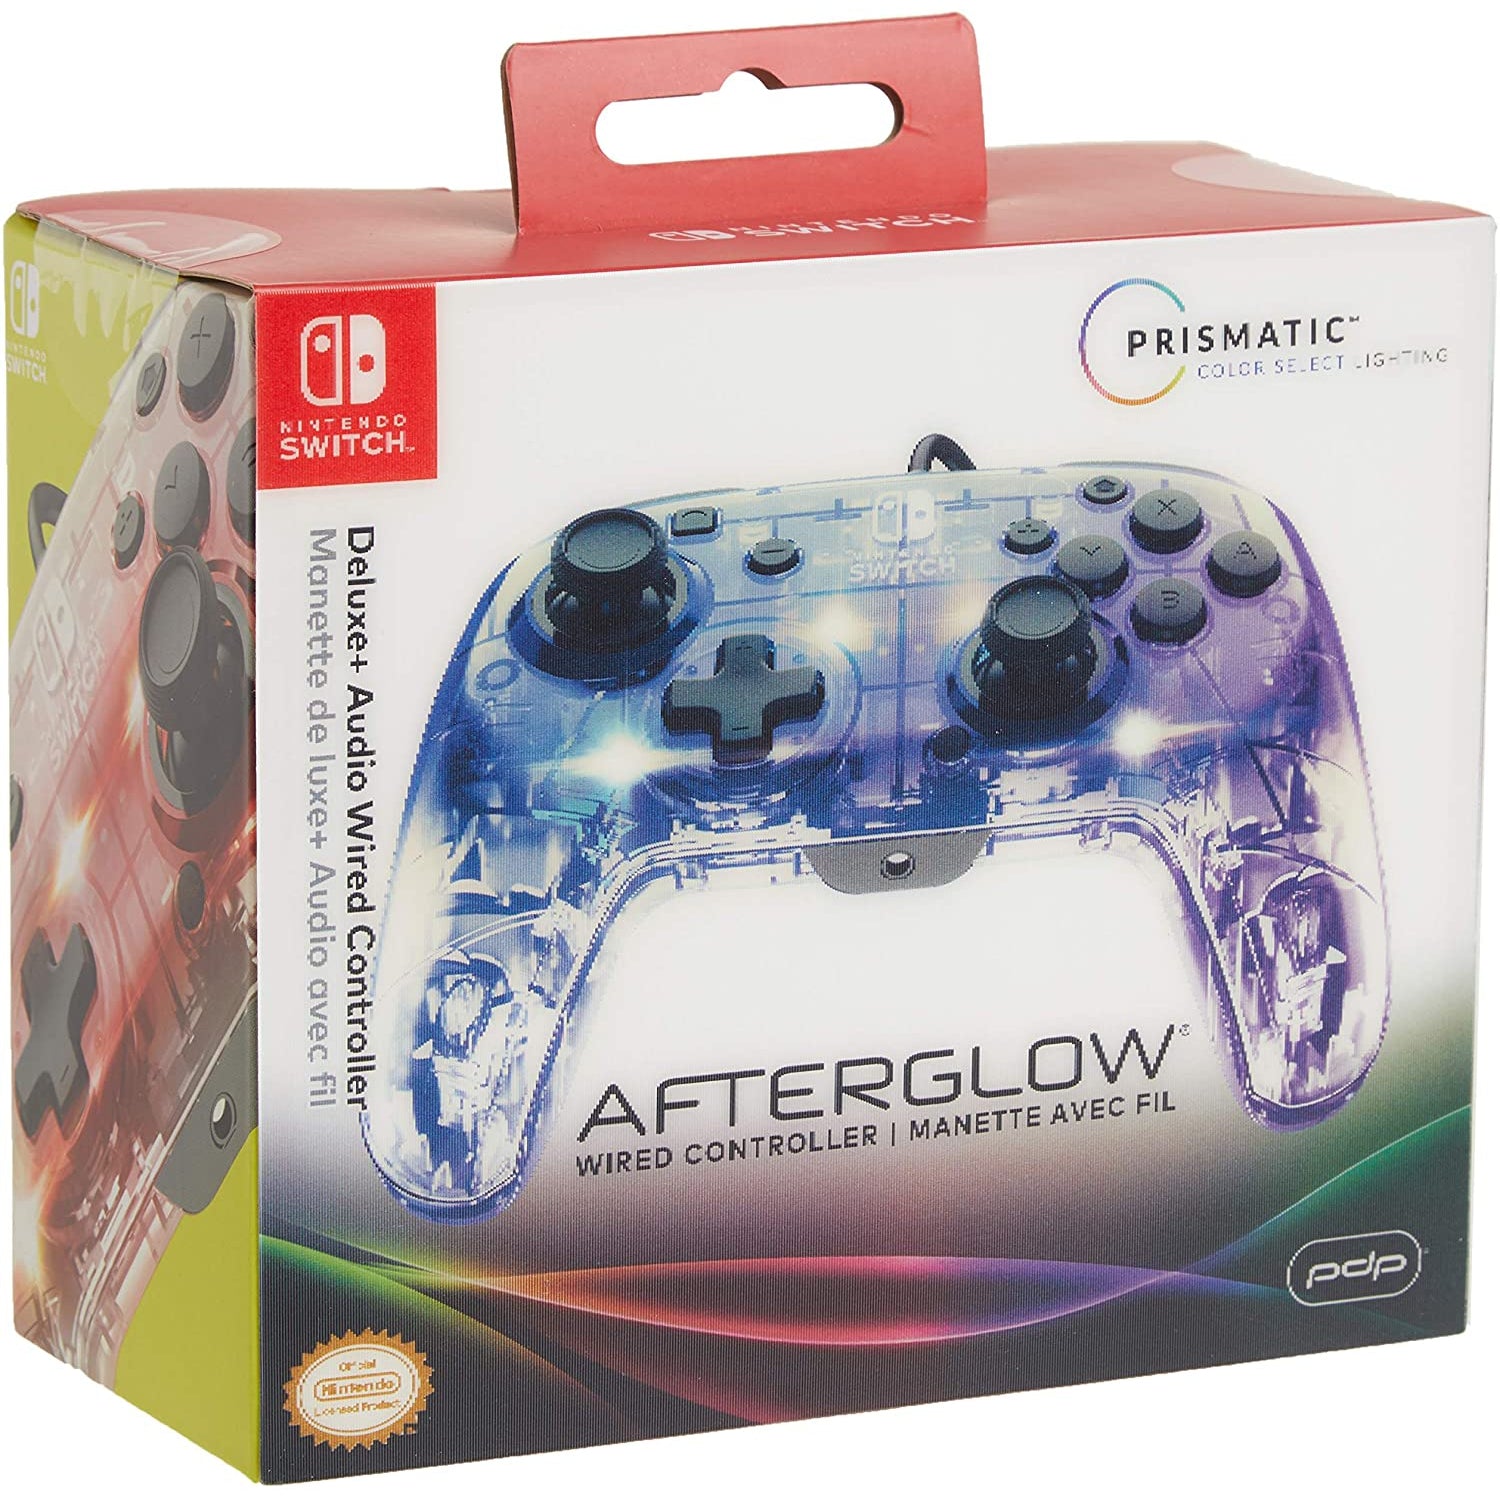 PDP Nintendo Switch Afterglow Deluxe Prismatic Wired Controller - Refurbished Pristine